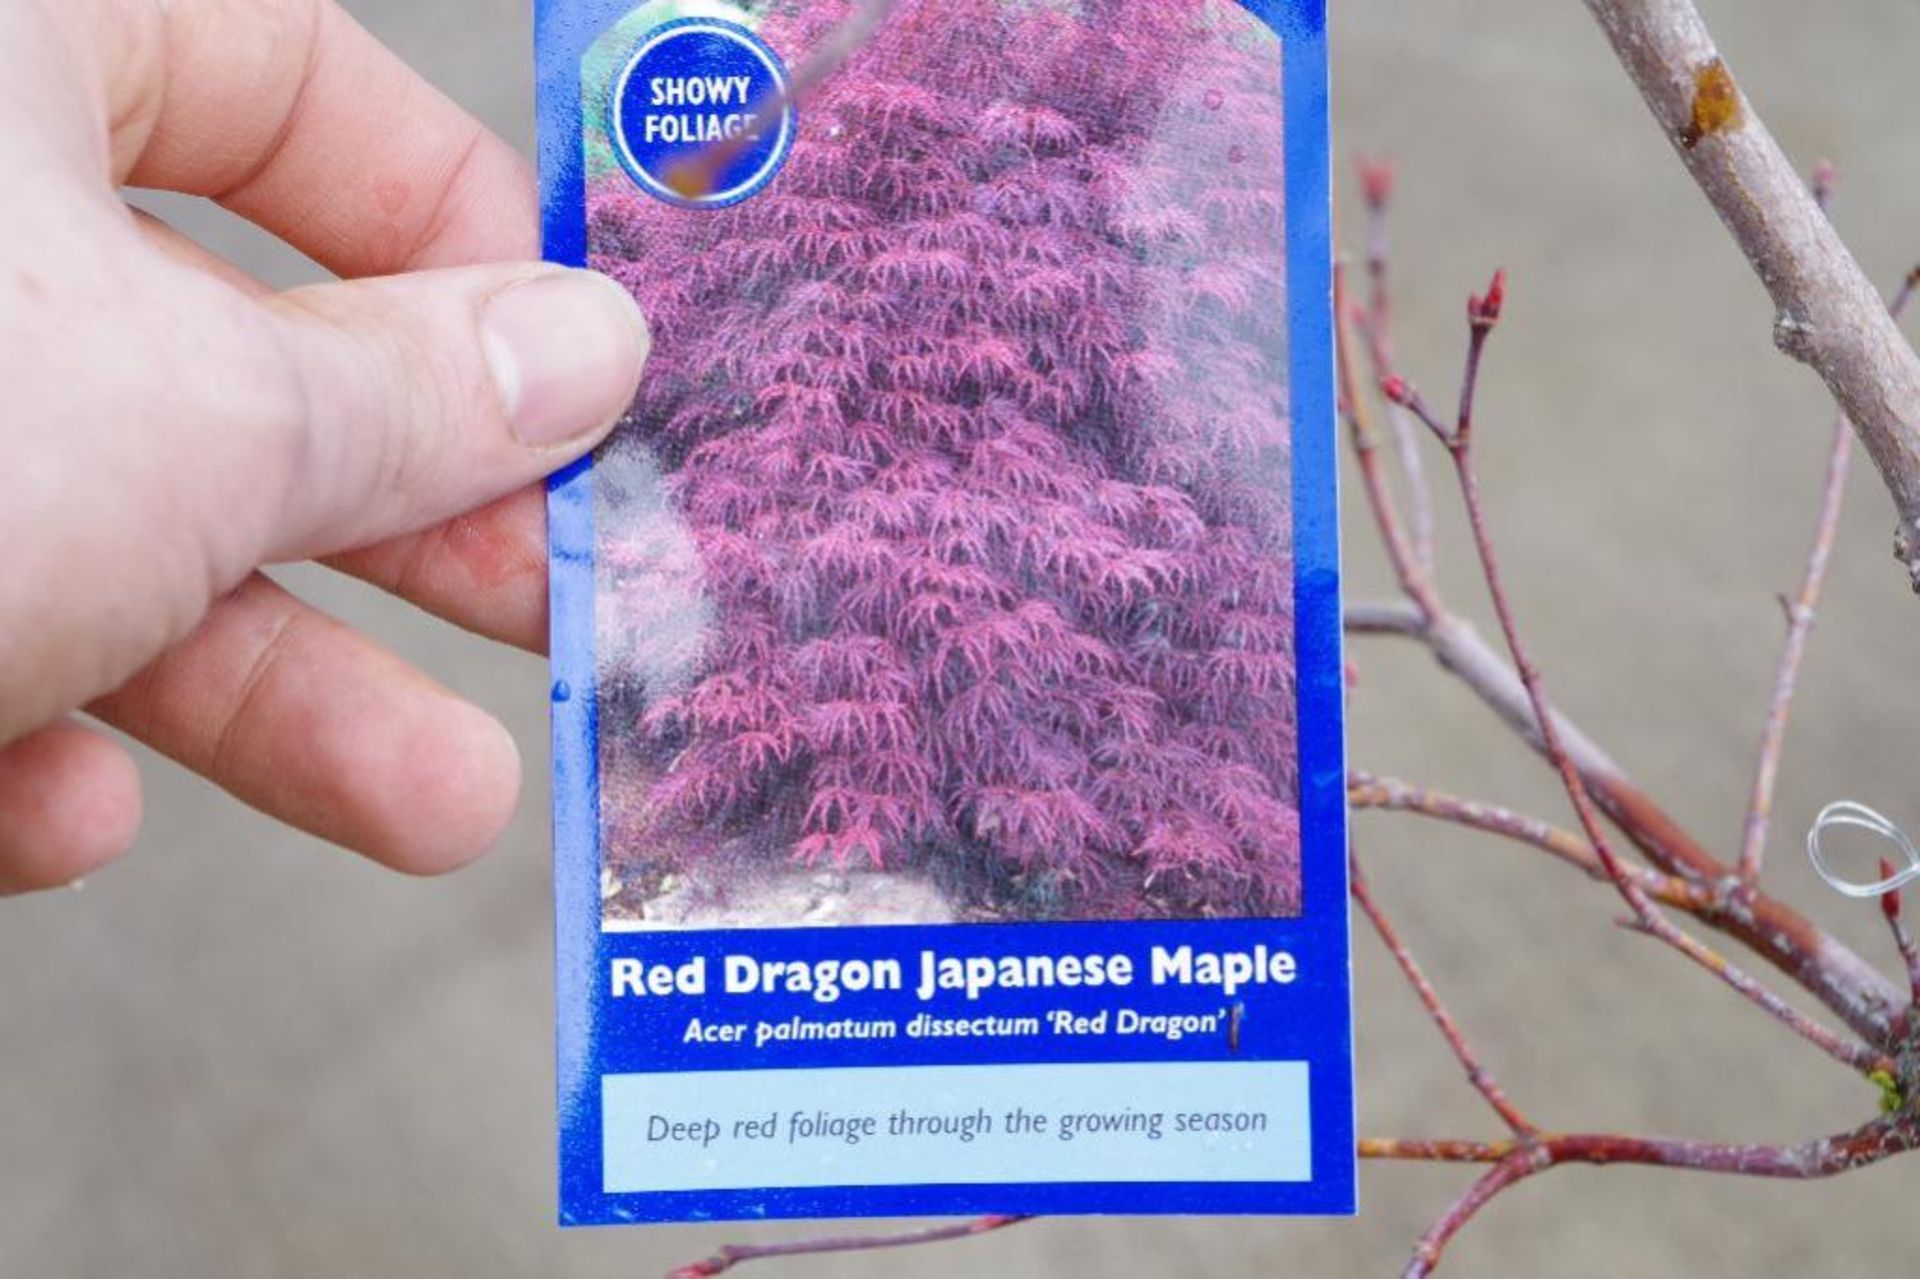 Red Dragon Japanese Maple - Image 2 of 2